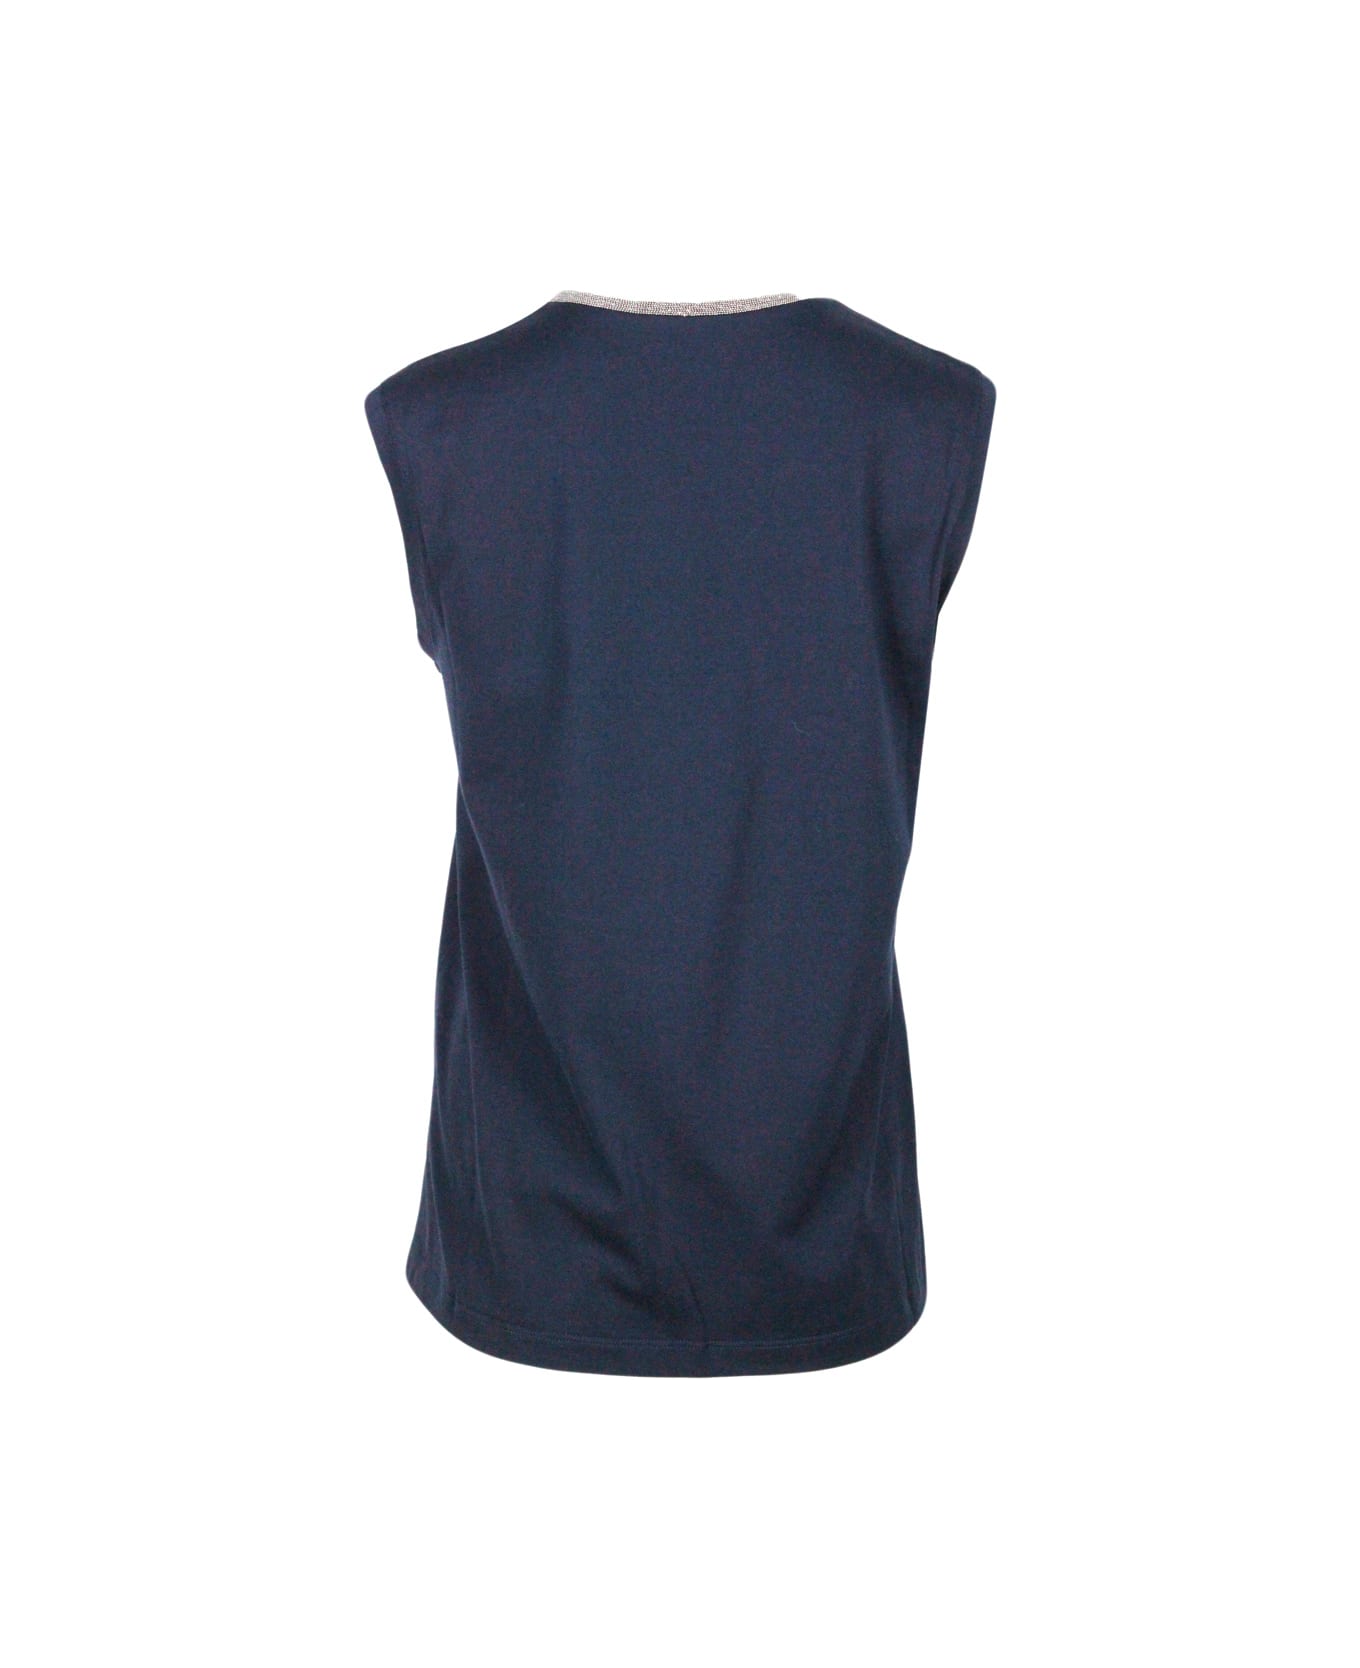 Fabiana Filippi Tank Top In Organic Cotton Jersey With V-neck Embellished With Rows Of Brilliant Jewels On The Neckline - Blu